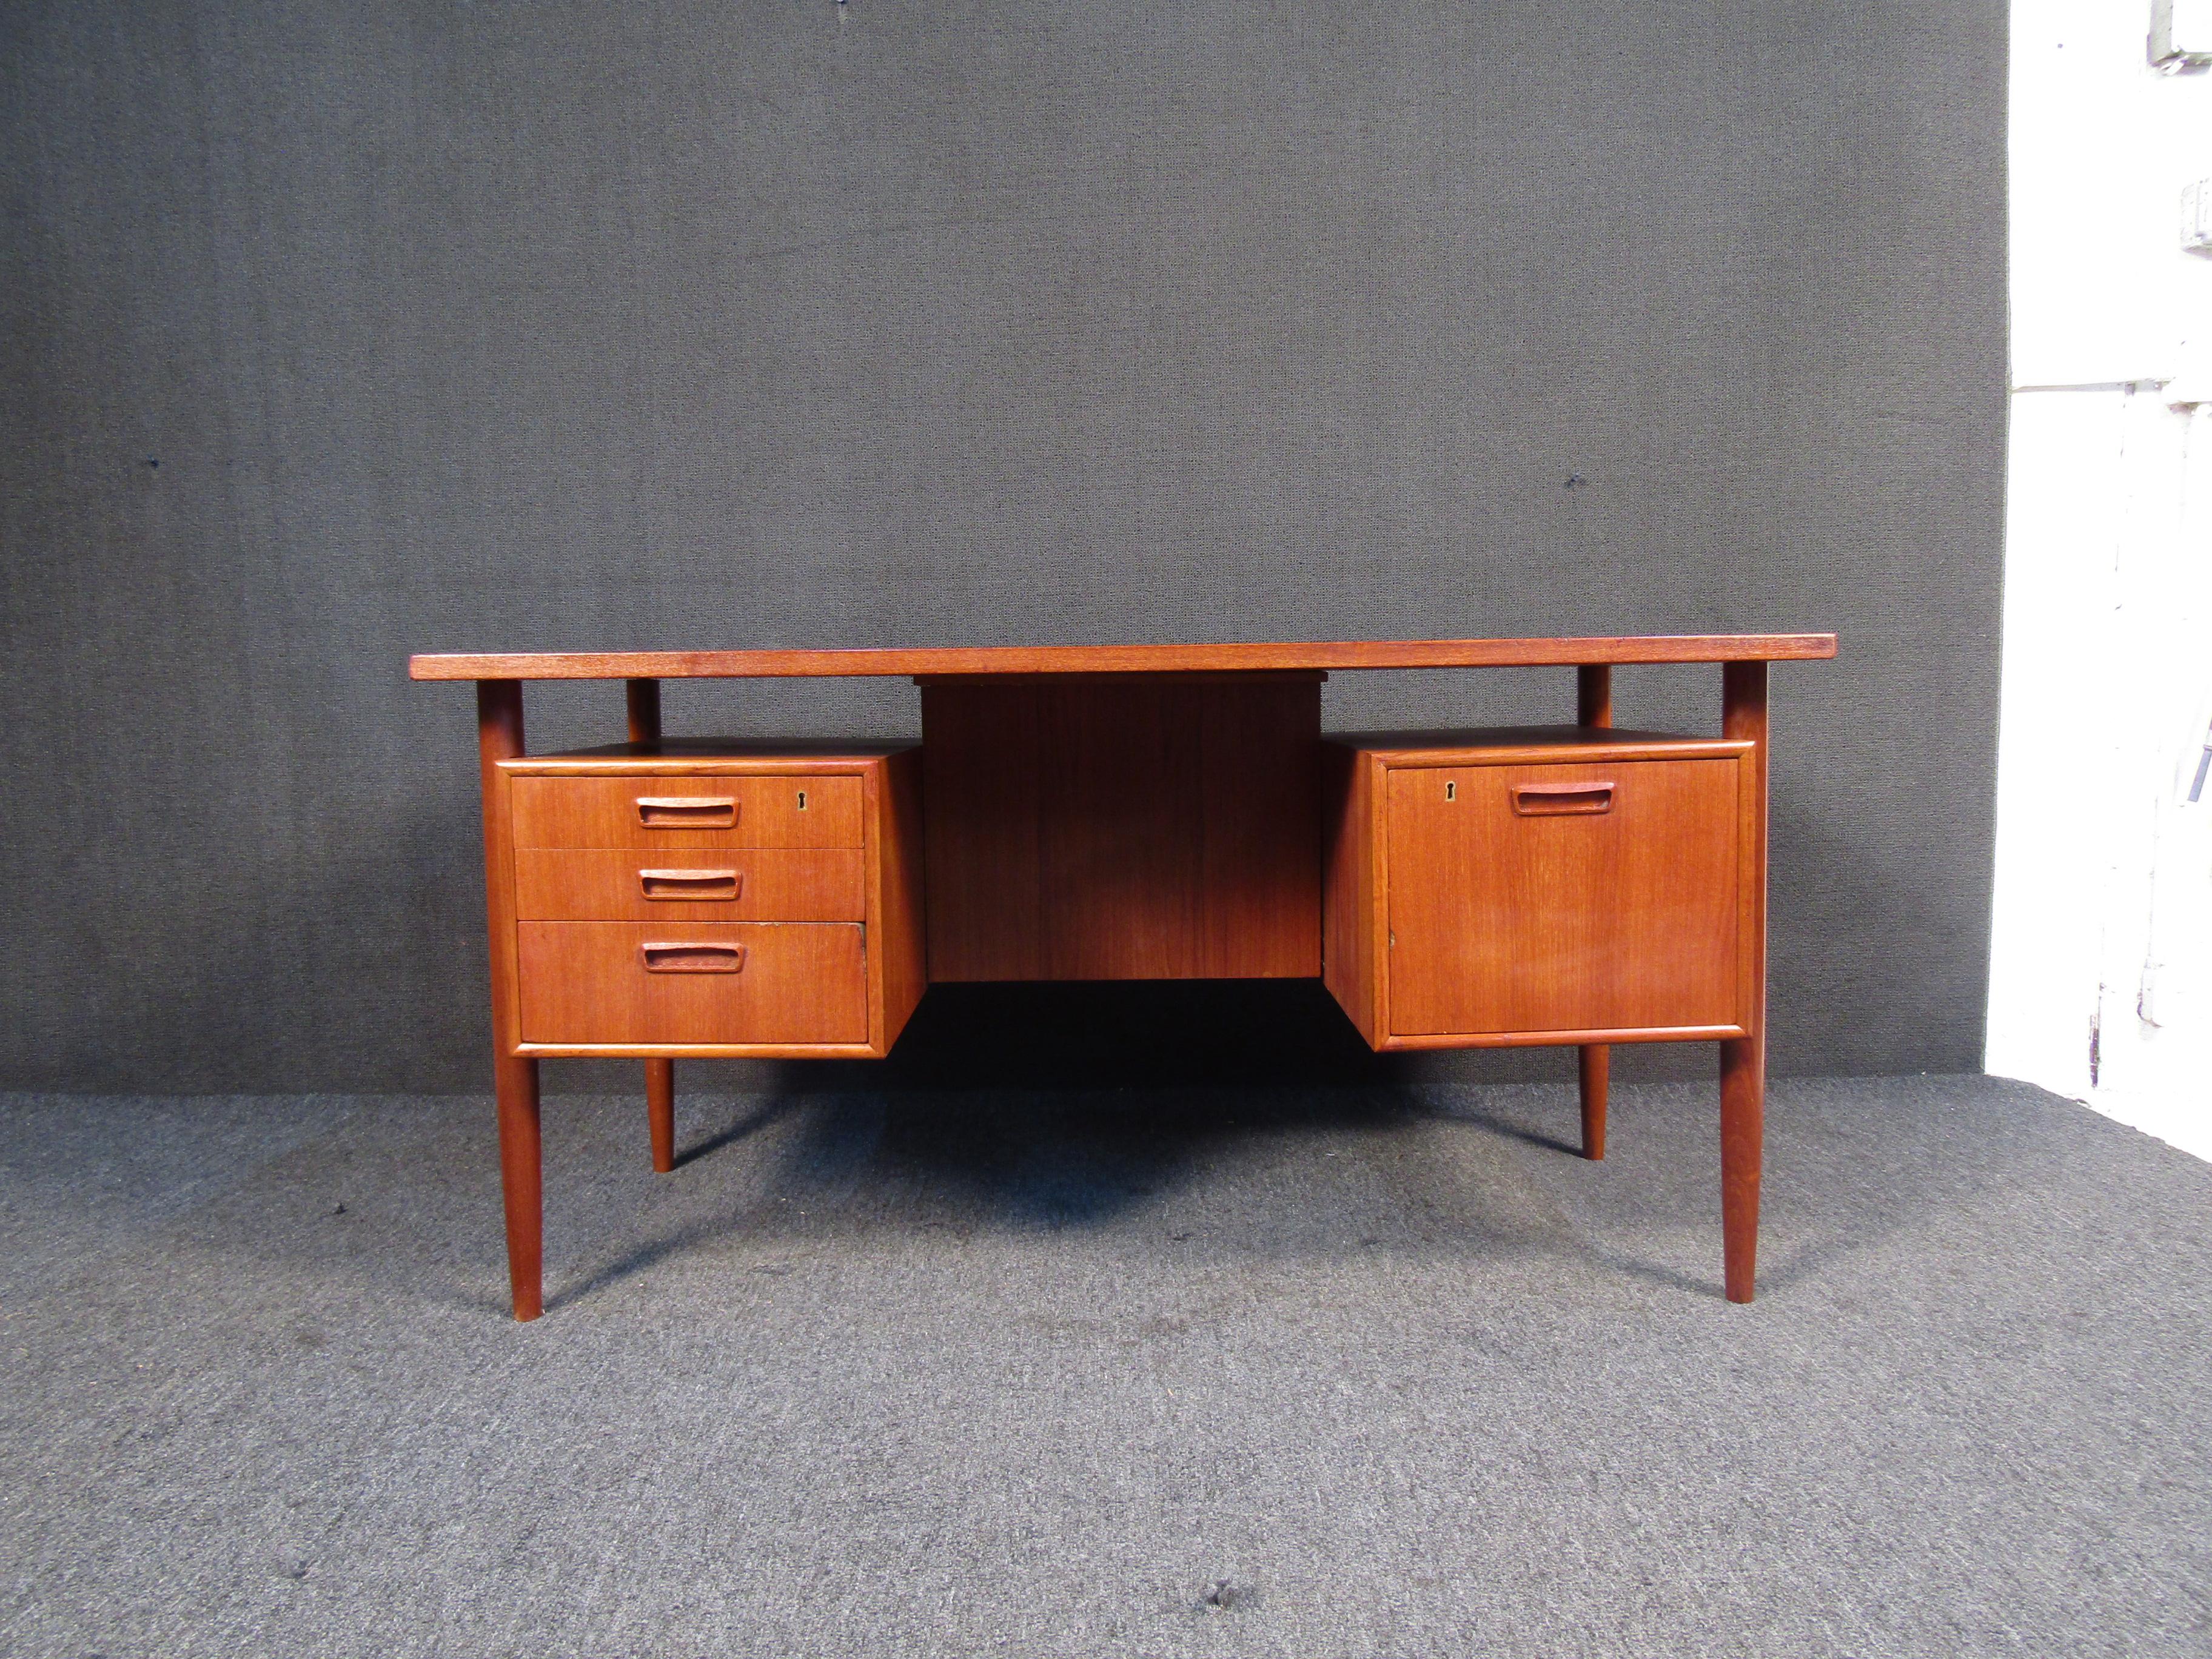 With three smaller drawers and a large storage compartment, this beautifully designed mid-century desk combines rich teak wood with an understated Scandinavian design. This vintage writing desk is made in Sweden with quality craftsmanship. Please